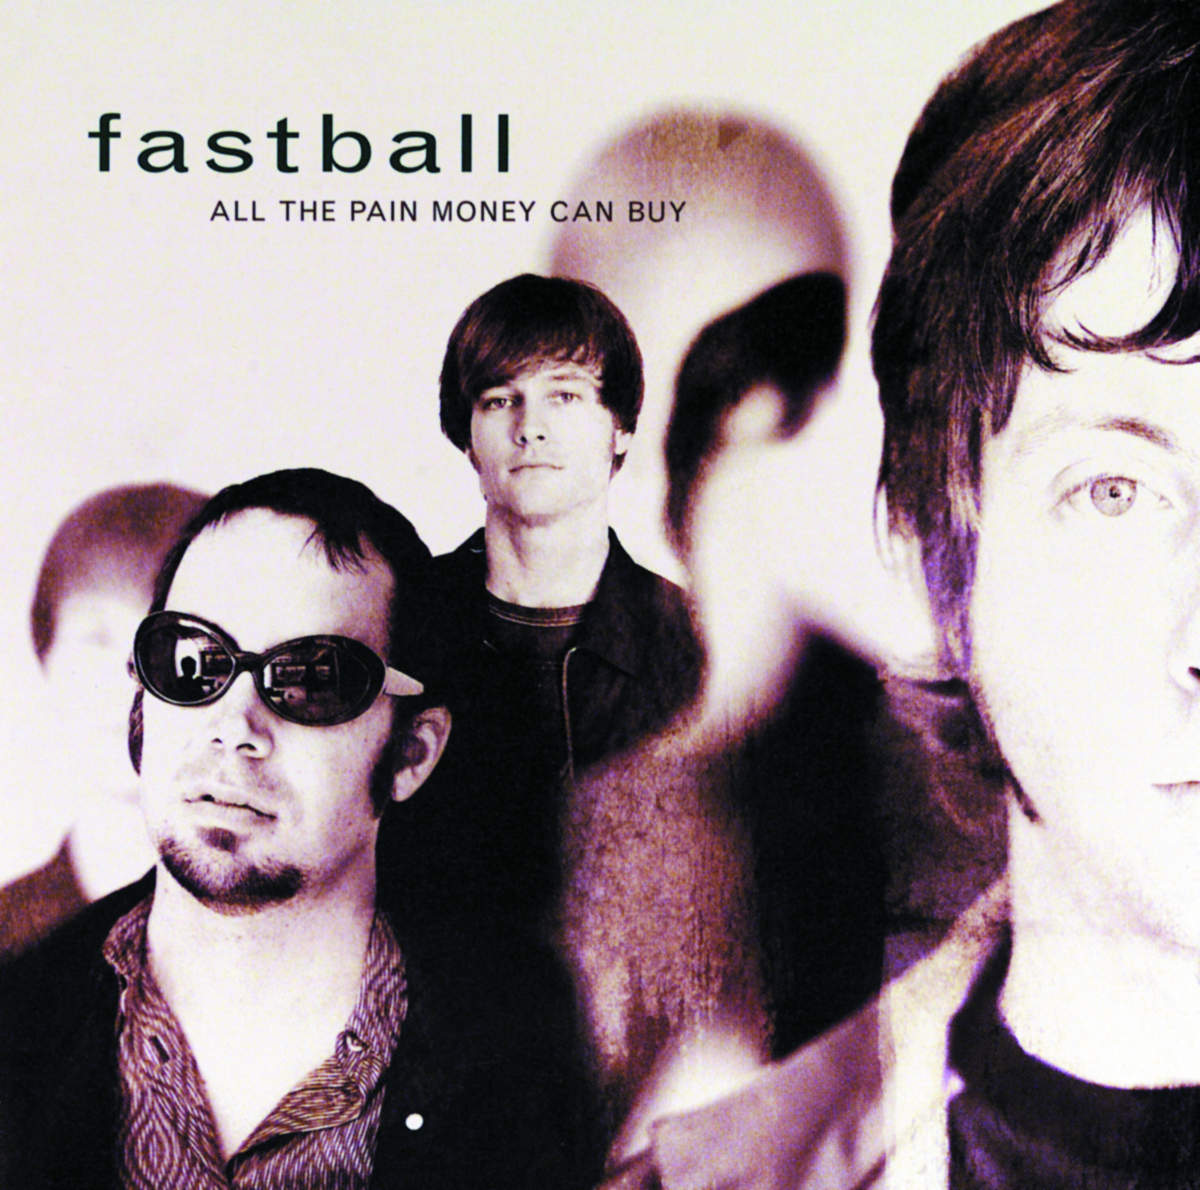 Art for The Way by Fastball